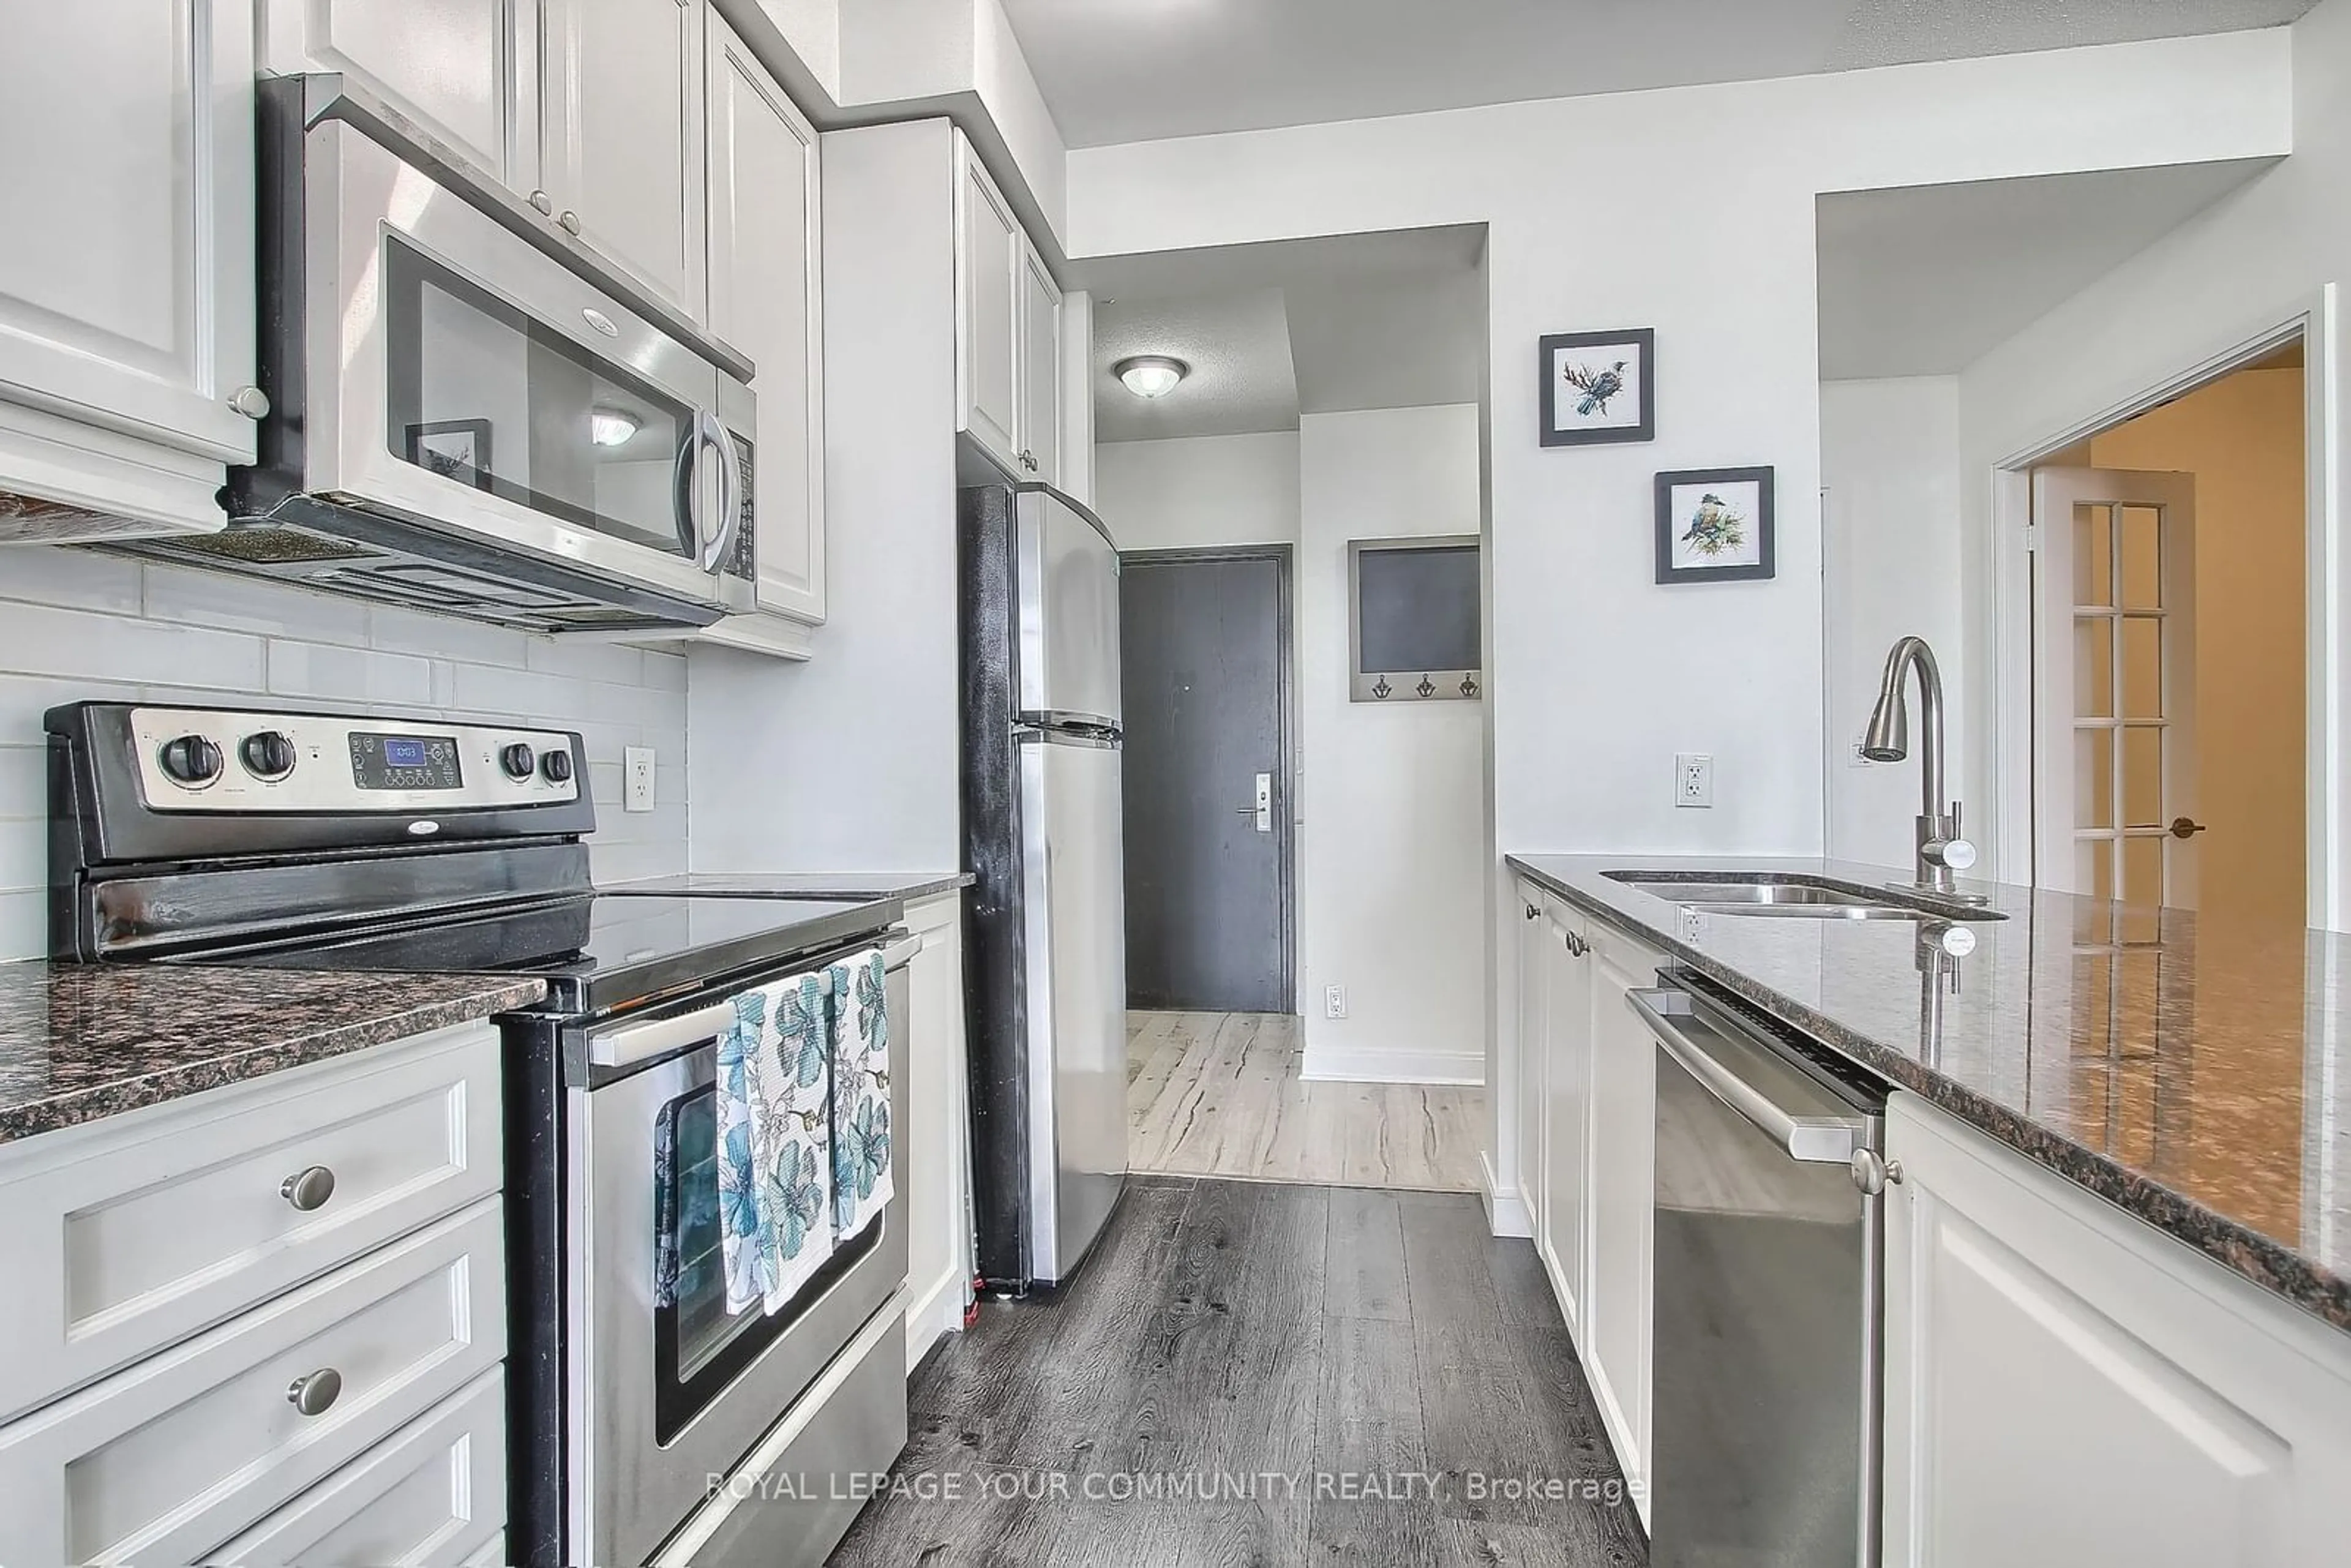 Standard kitchen for 80 Absolute Ave #1901, Mississauga Ontario L4Z 0A5